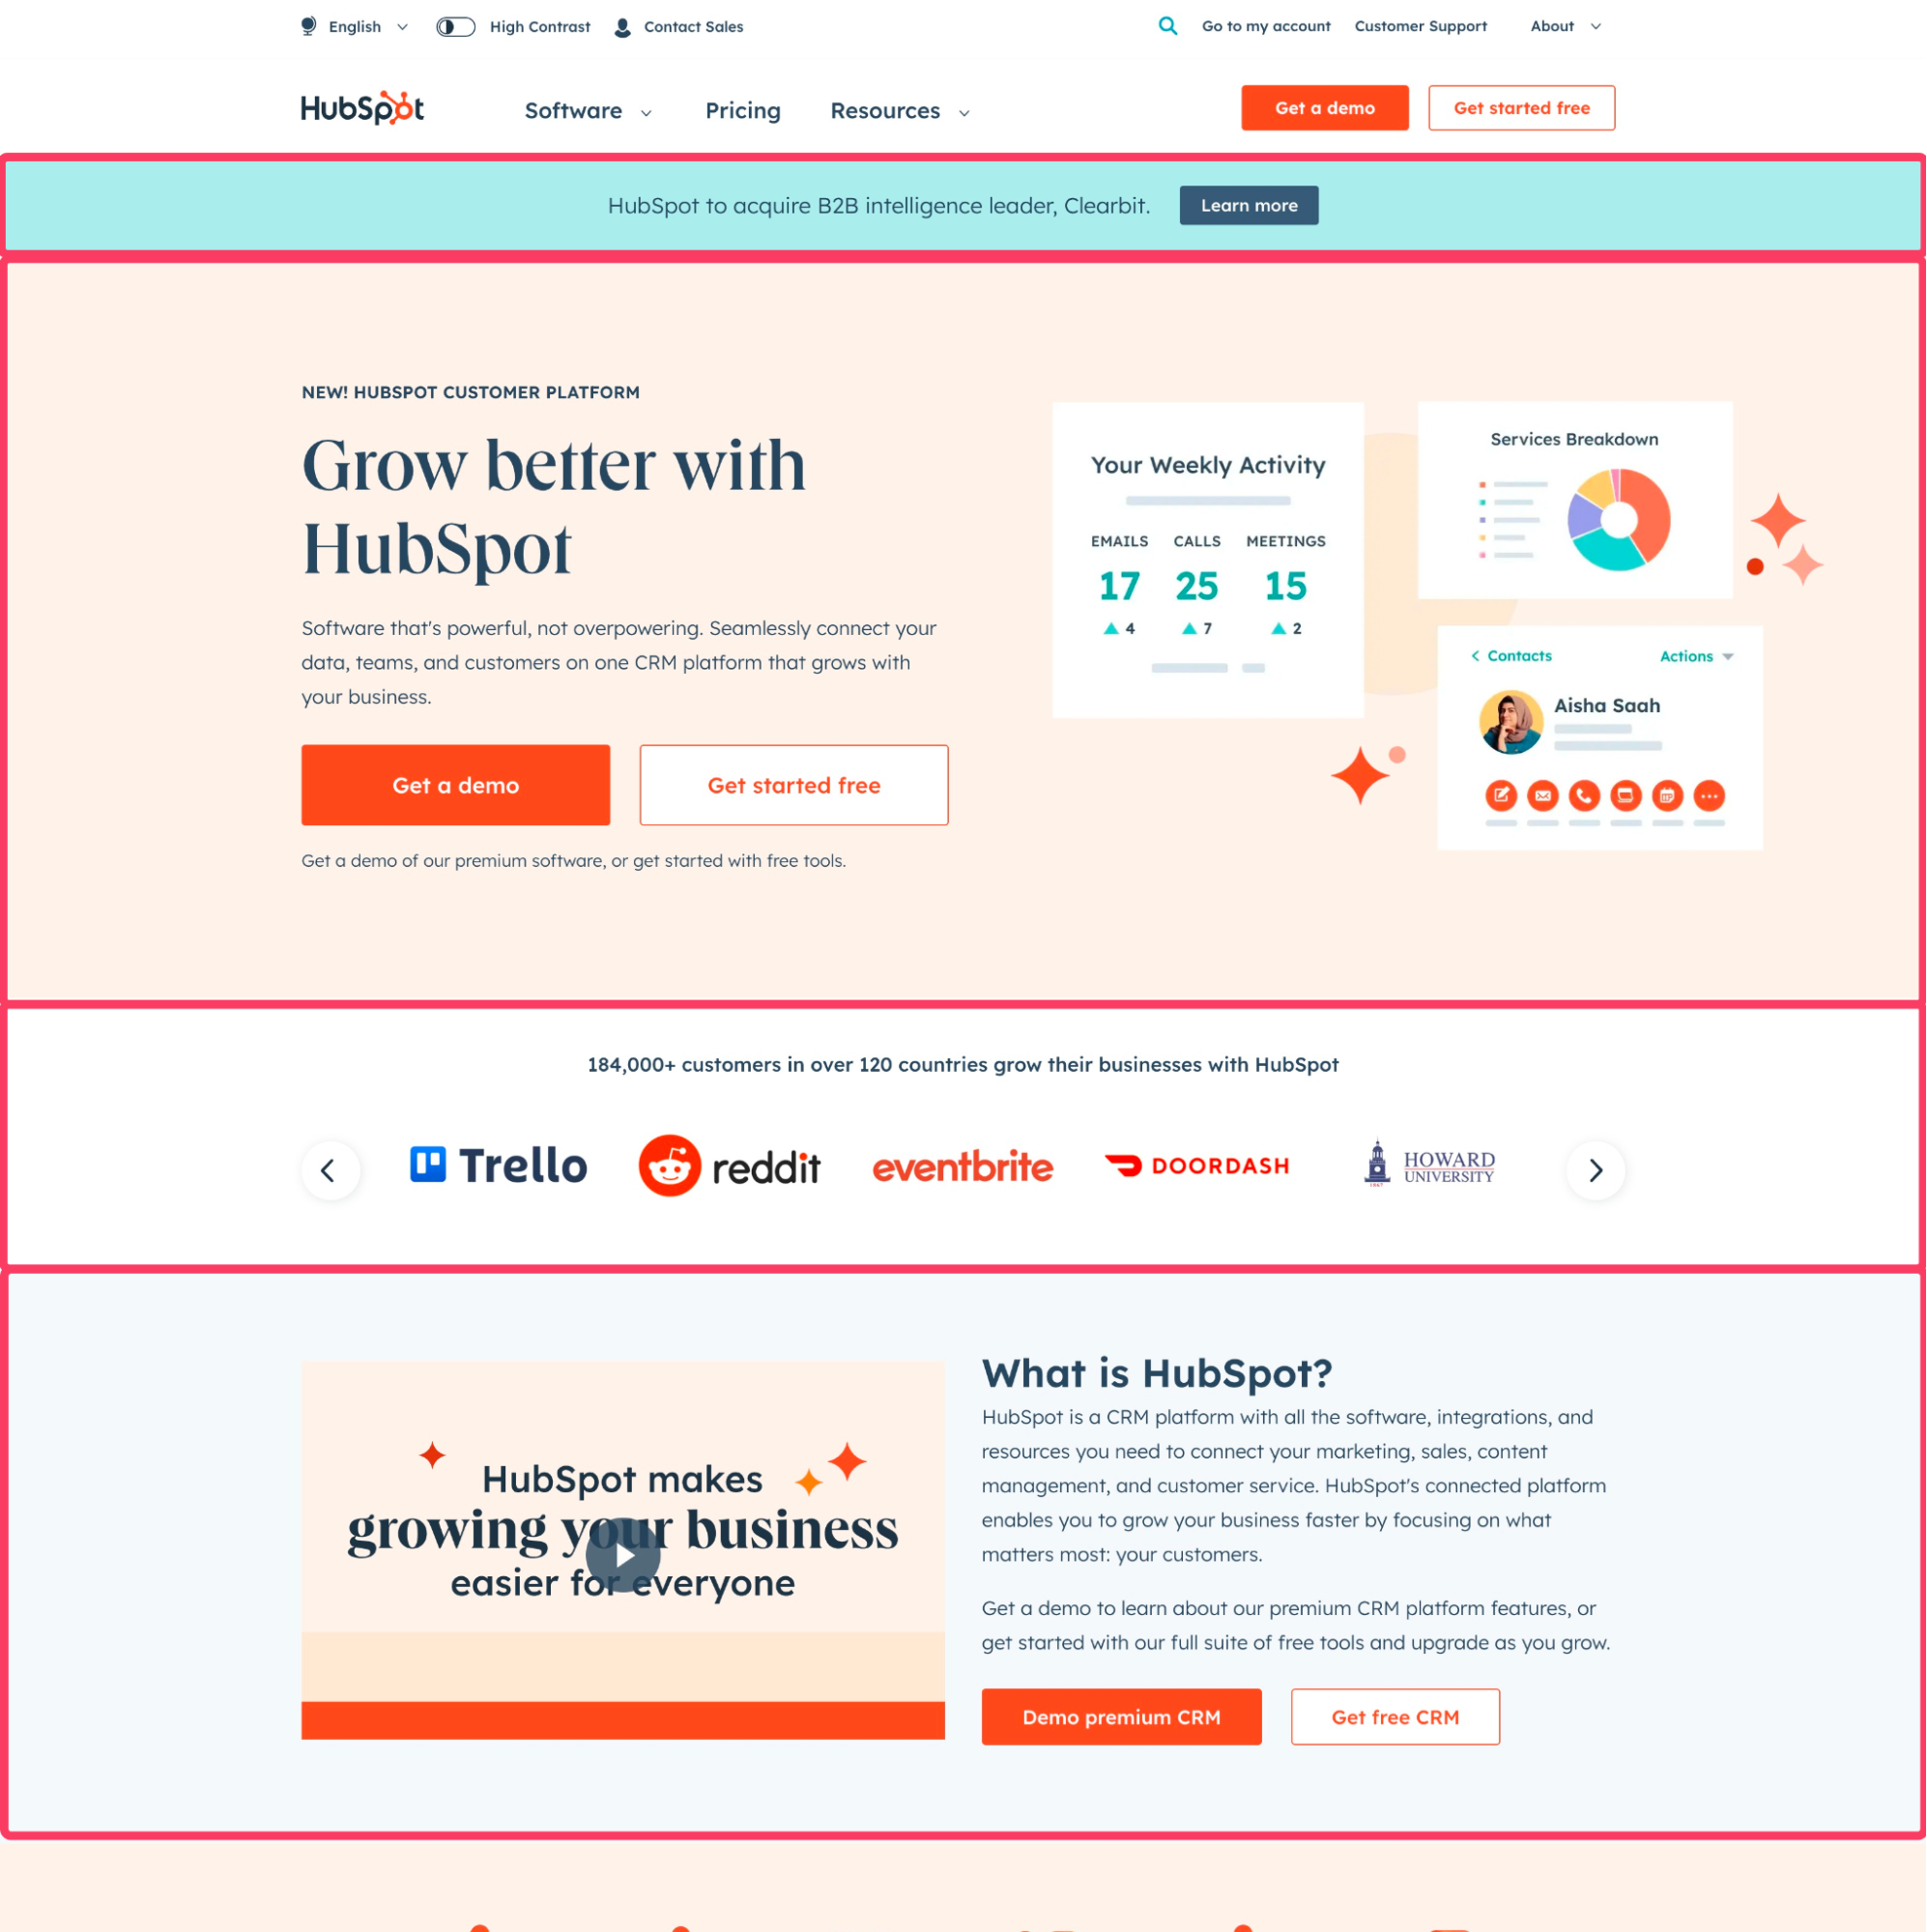 Outlines showing sections from HubSpot's main site.